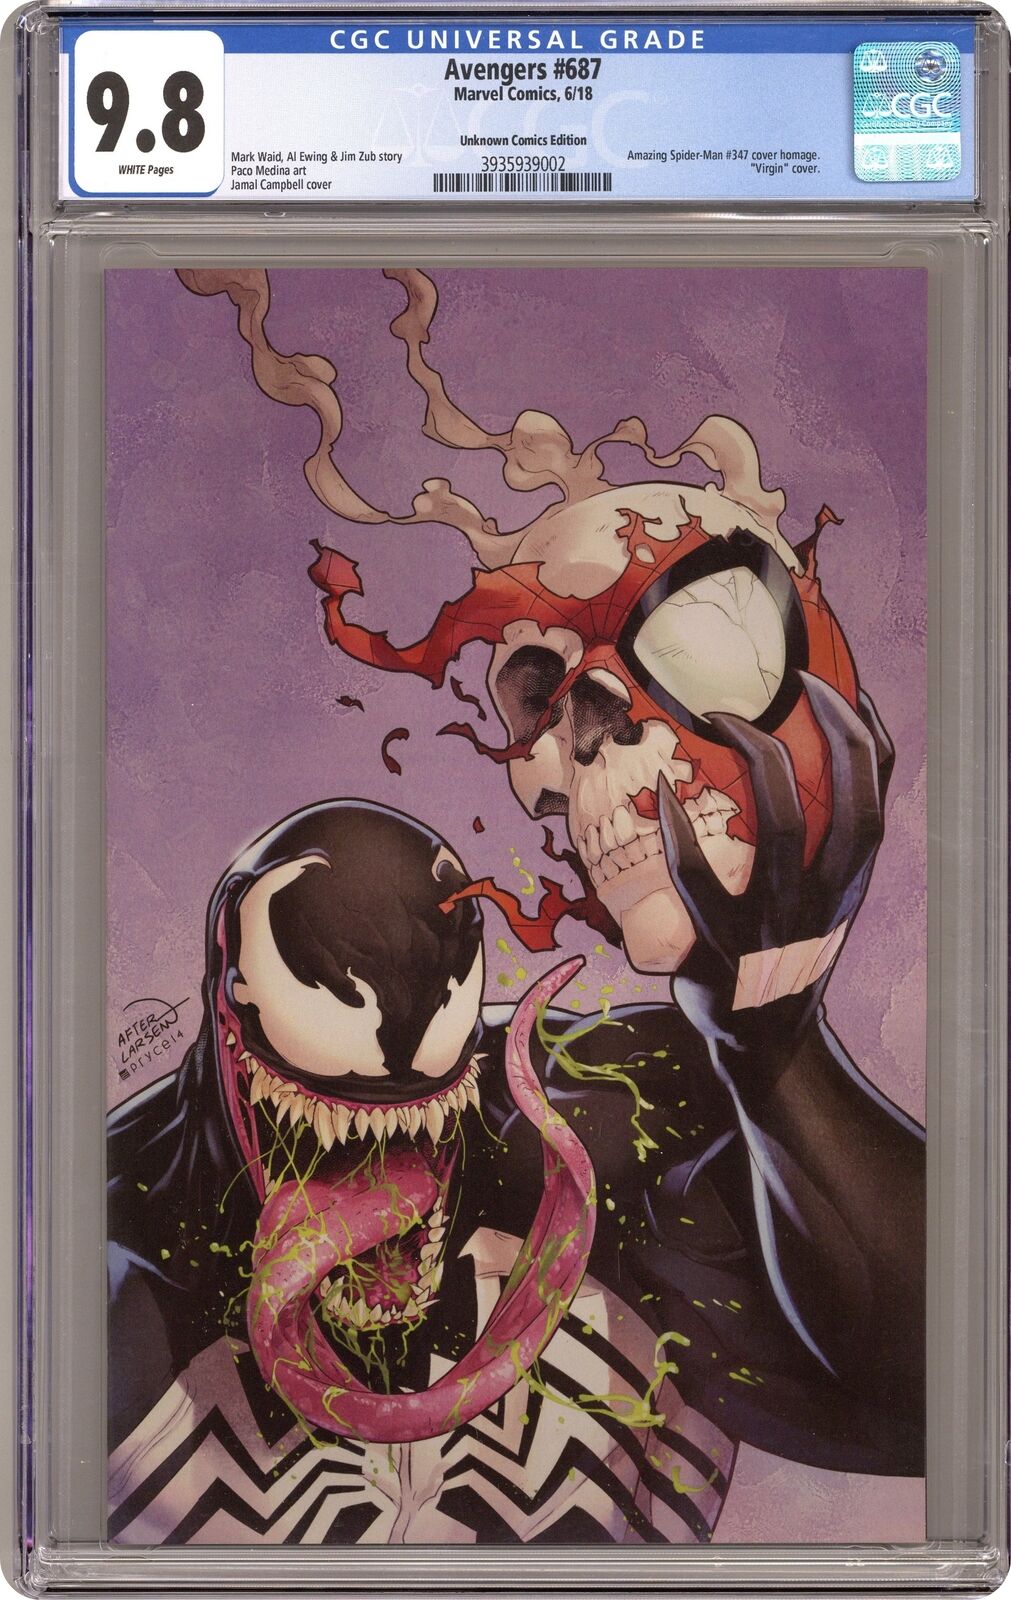 Avengers #687 Campbell Unknown Virgin Variant CGC 9.8 2018 3935939002